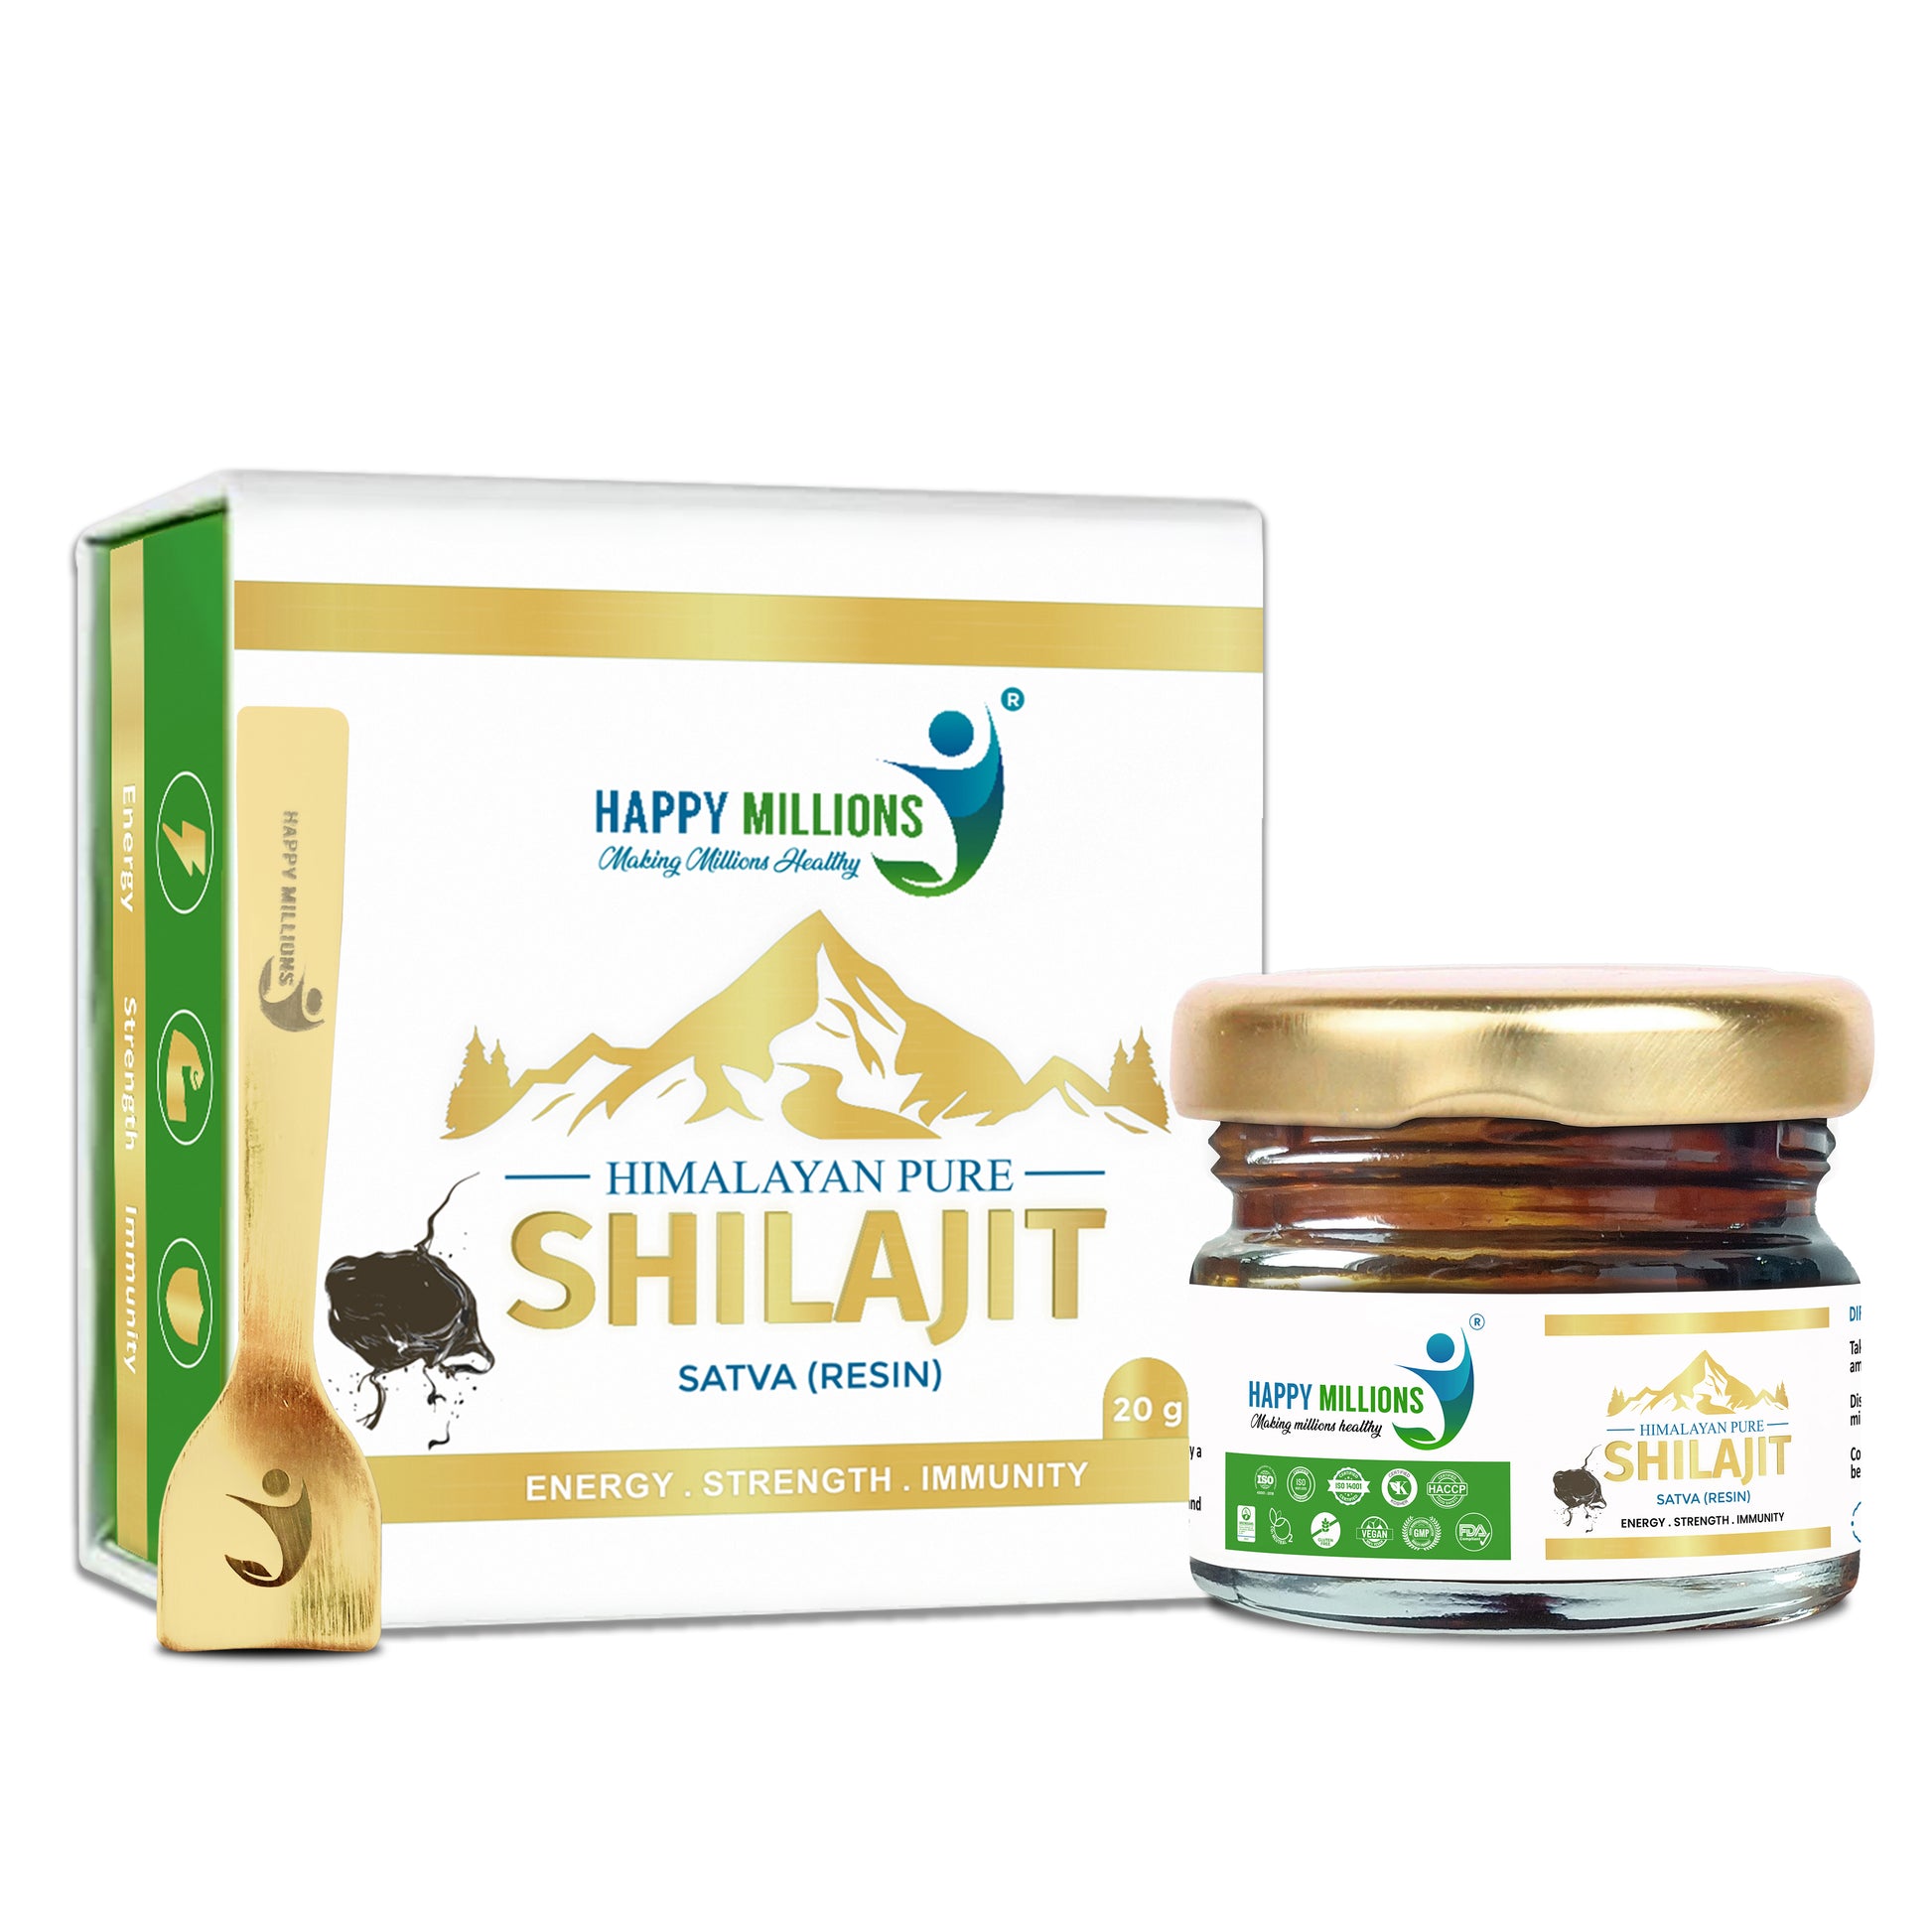 The Pure Happy Millions Shilajit Resin Boost Energy, Vitality & Wellness with High-Grade, Natural Shilajit for Balanced Body Functions & Enhanced Performance.